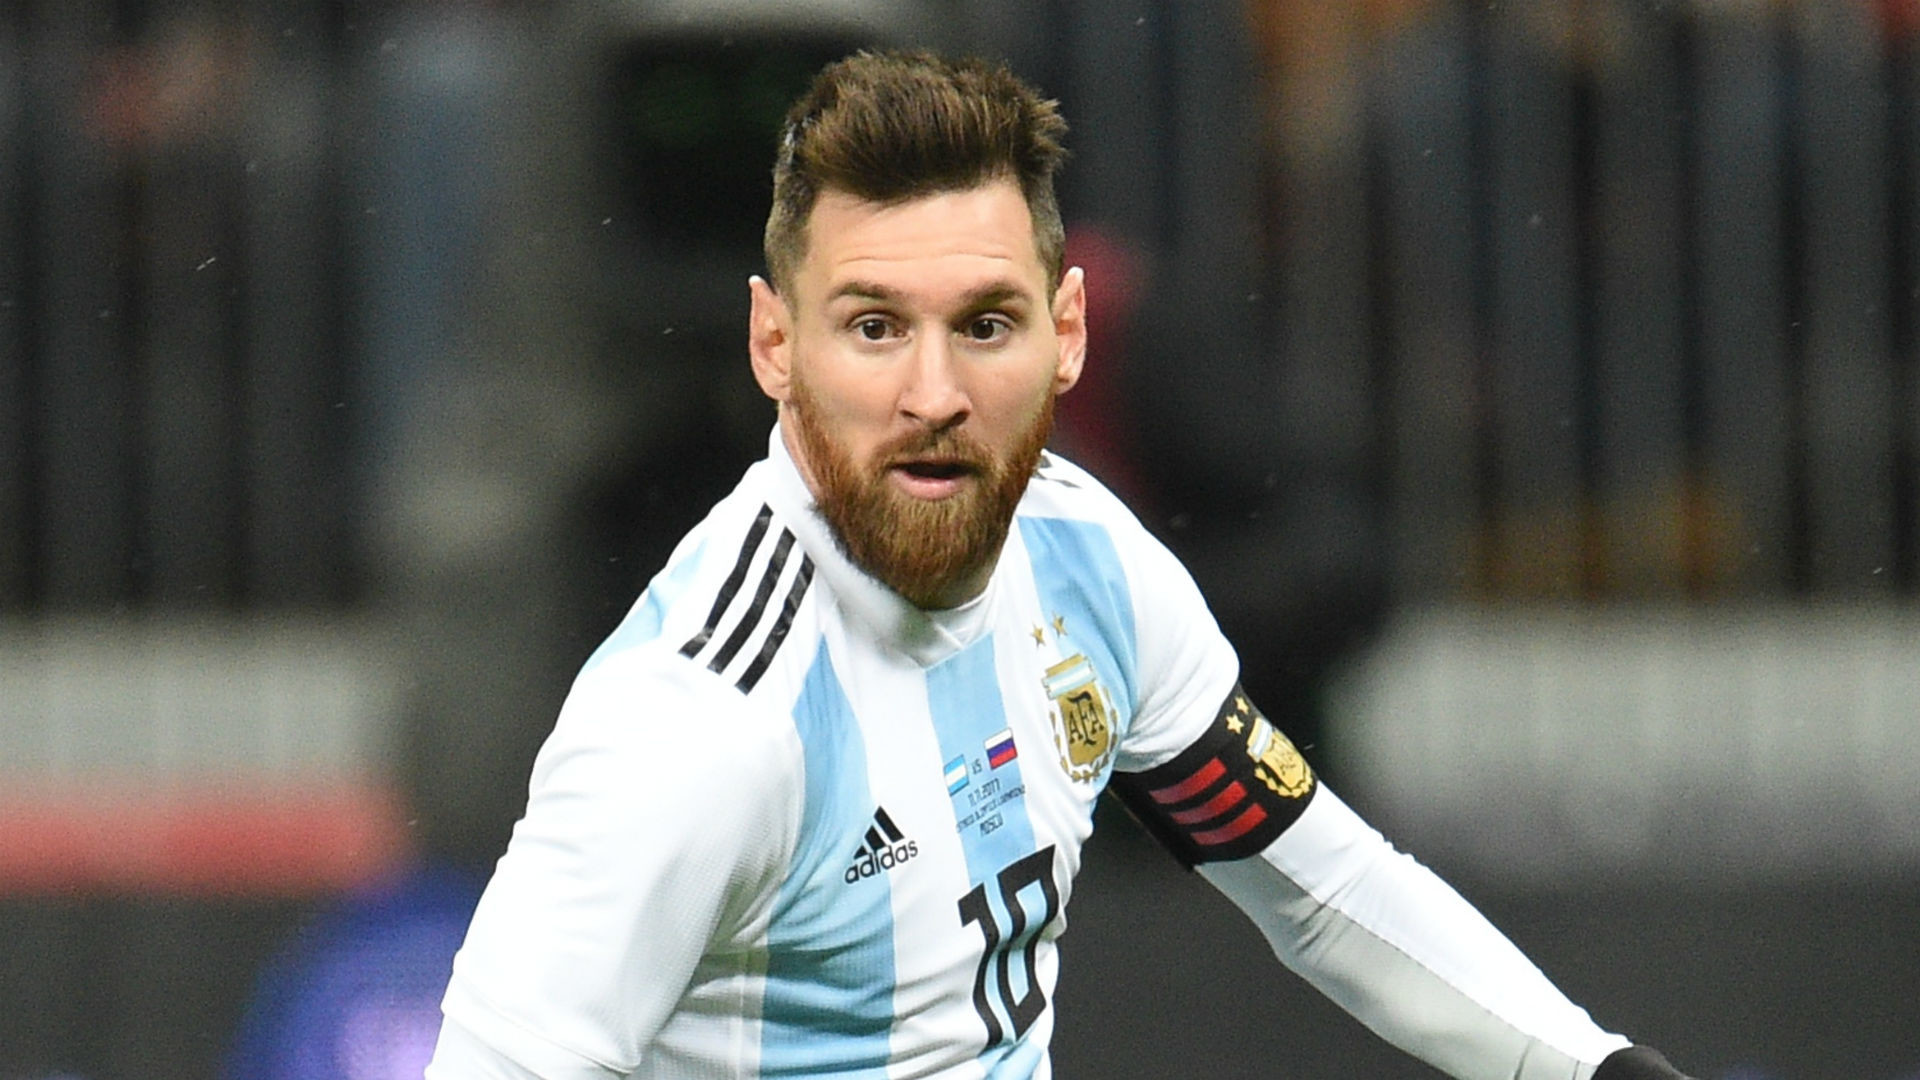 1920x1080 ... 2018 Hd Sports 4k Wallpapers. Messi Joins Argentina S World Cup  Training Camp Soccer Sporting News